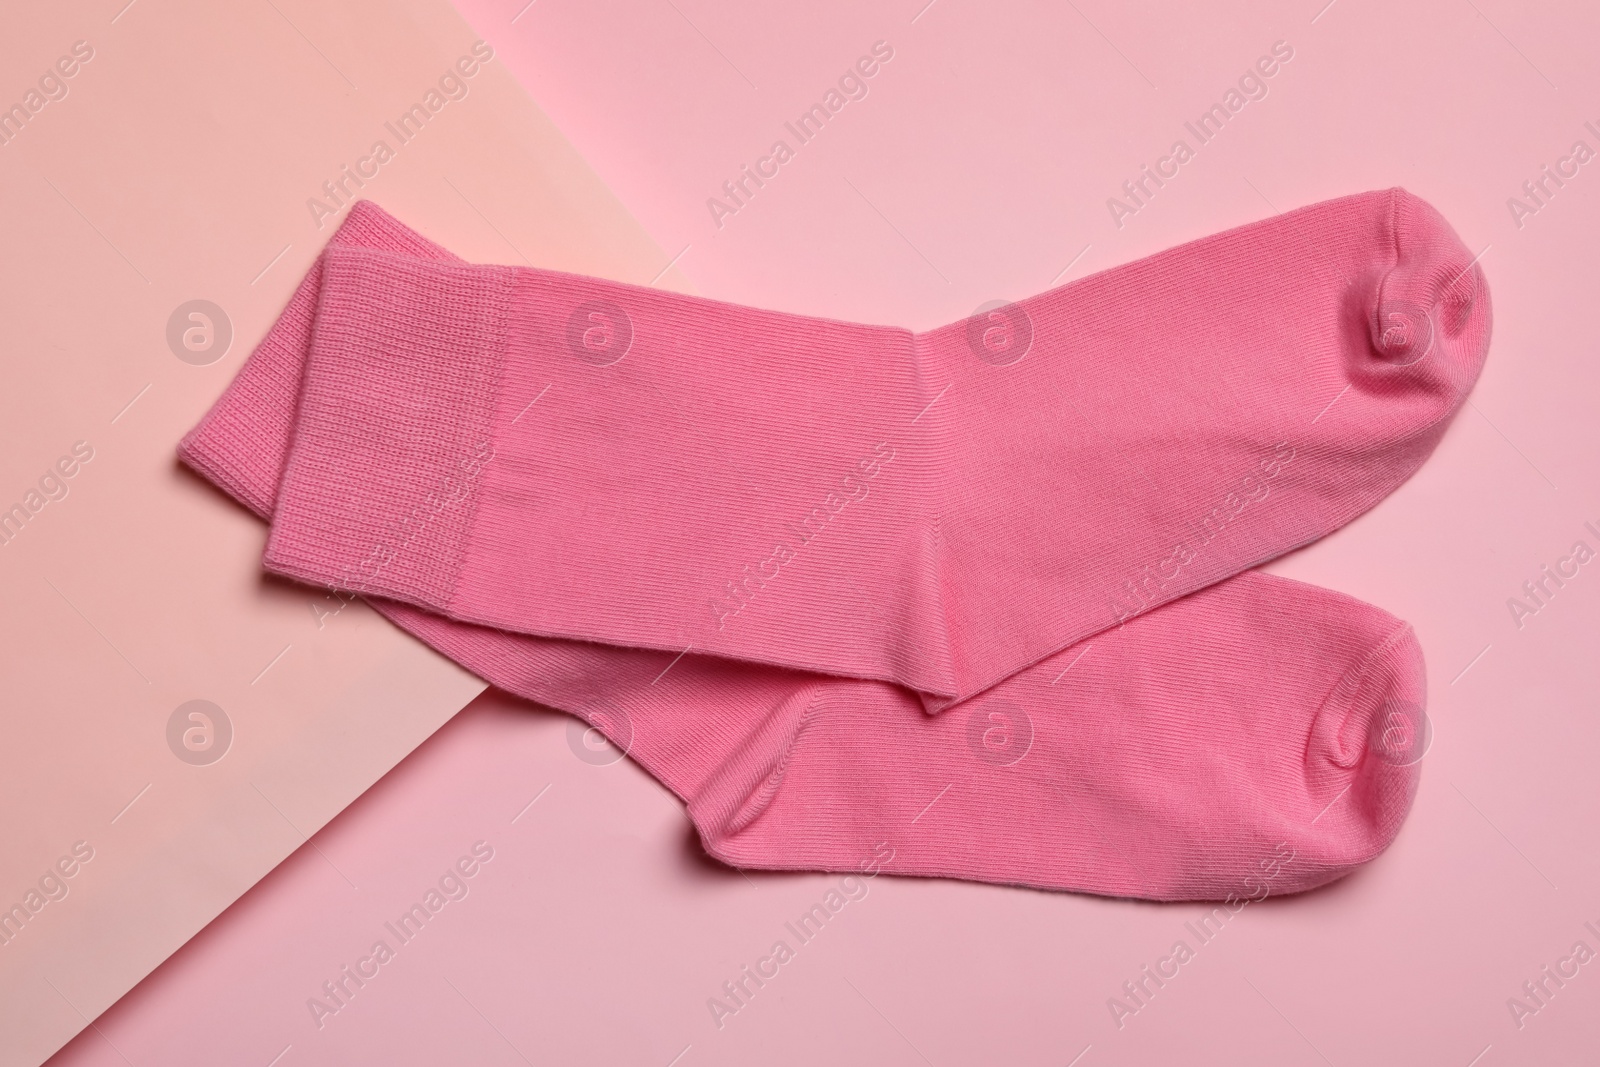 Photo of Pair of new socks on pink background, flat lay